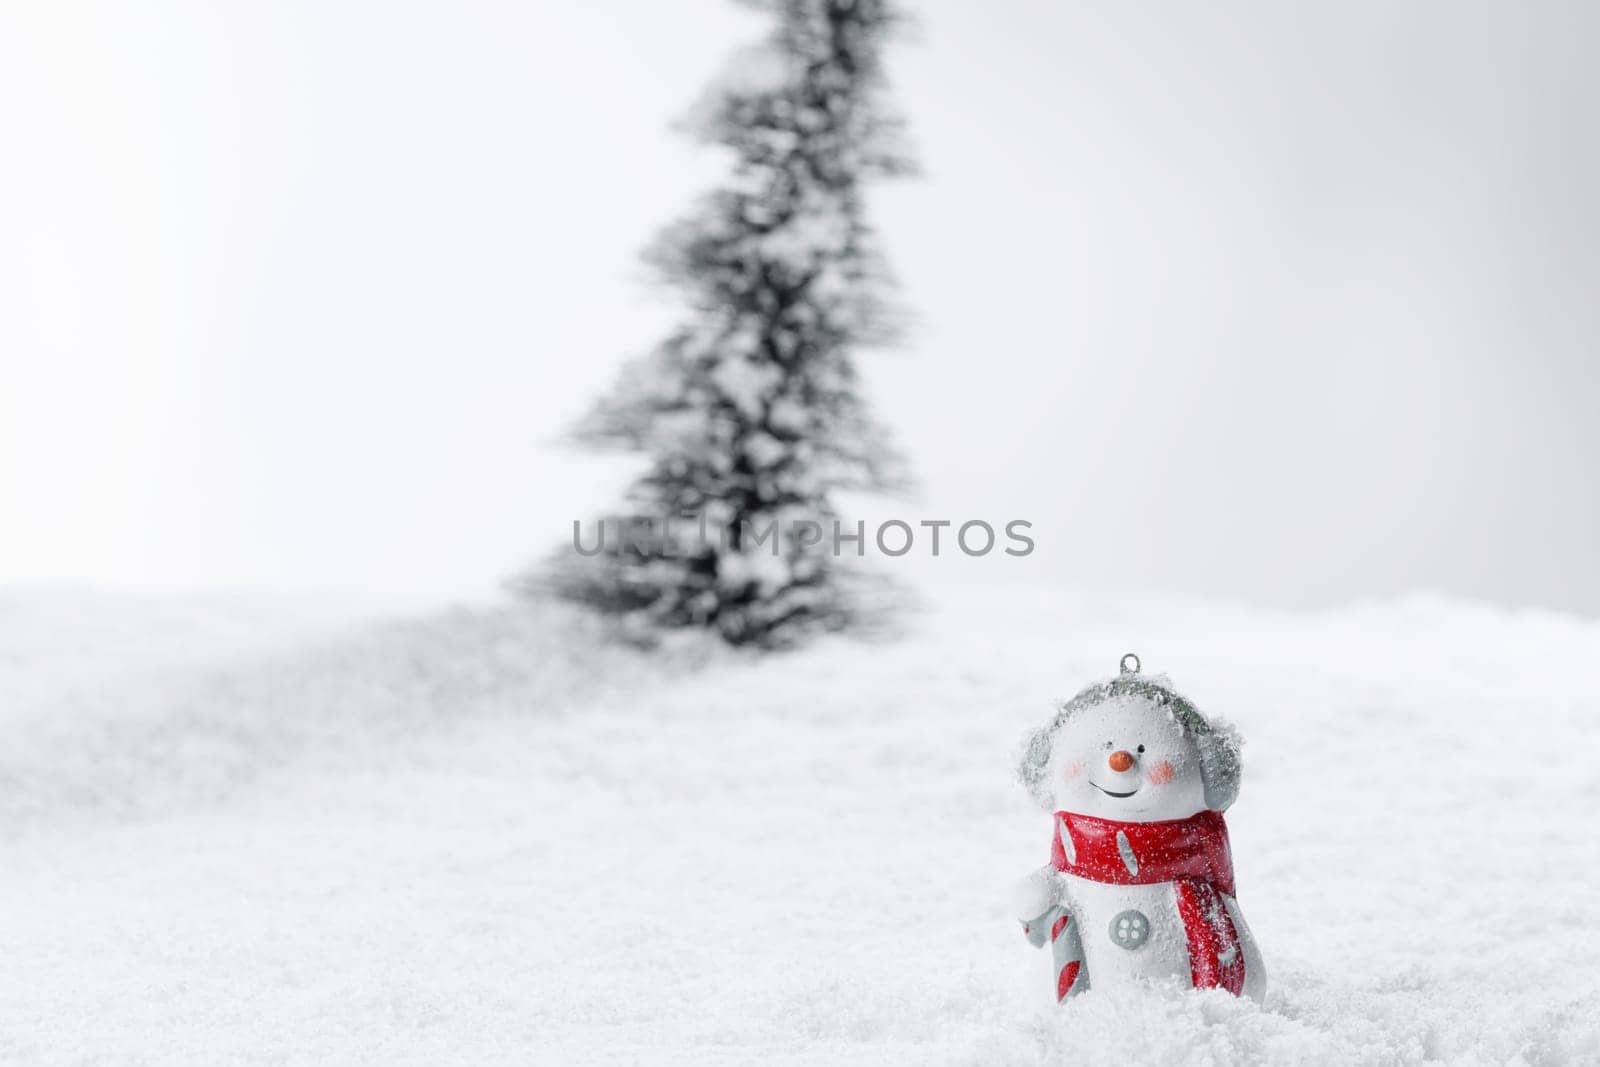 Christmas tree and snowman by Yellowj